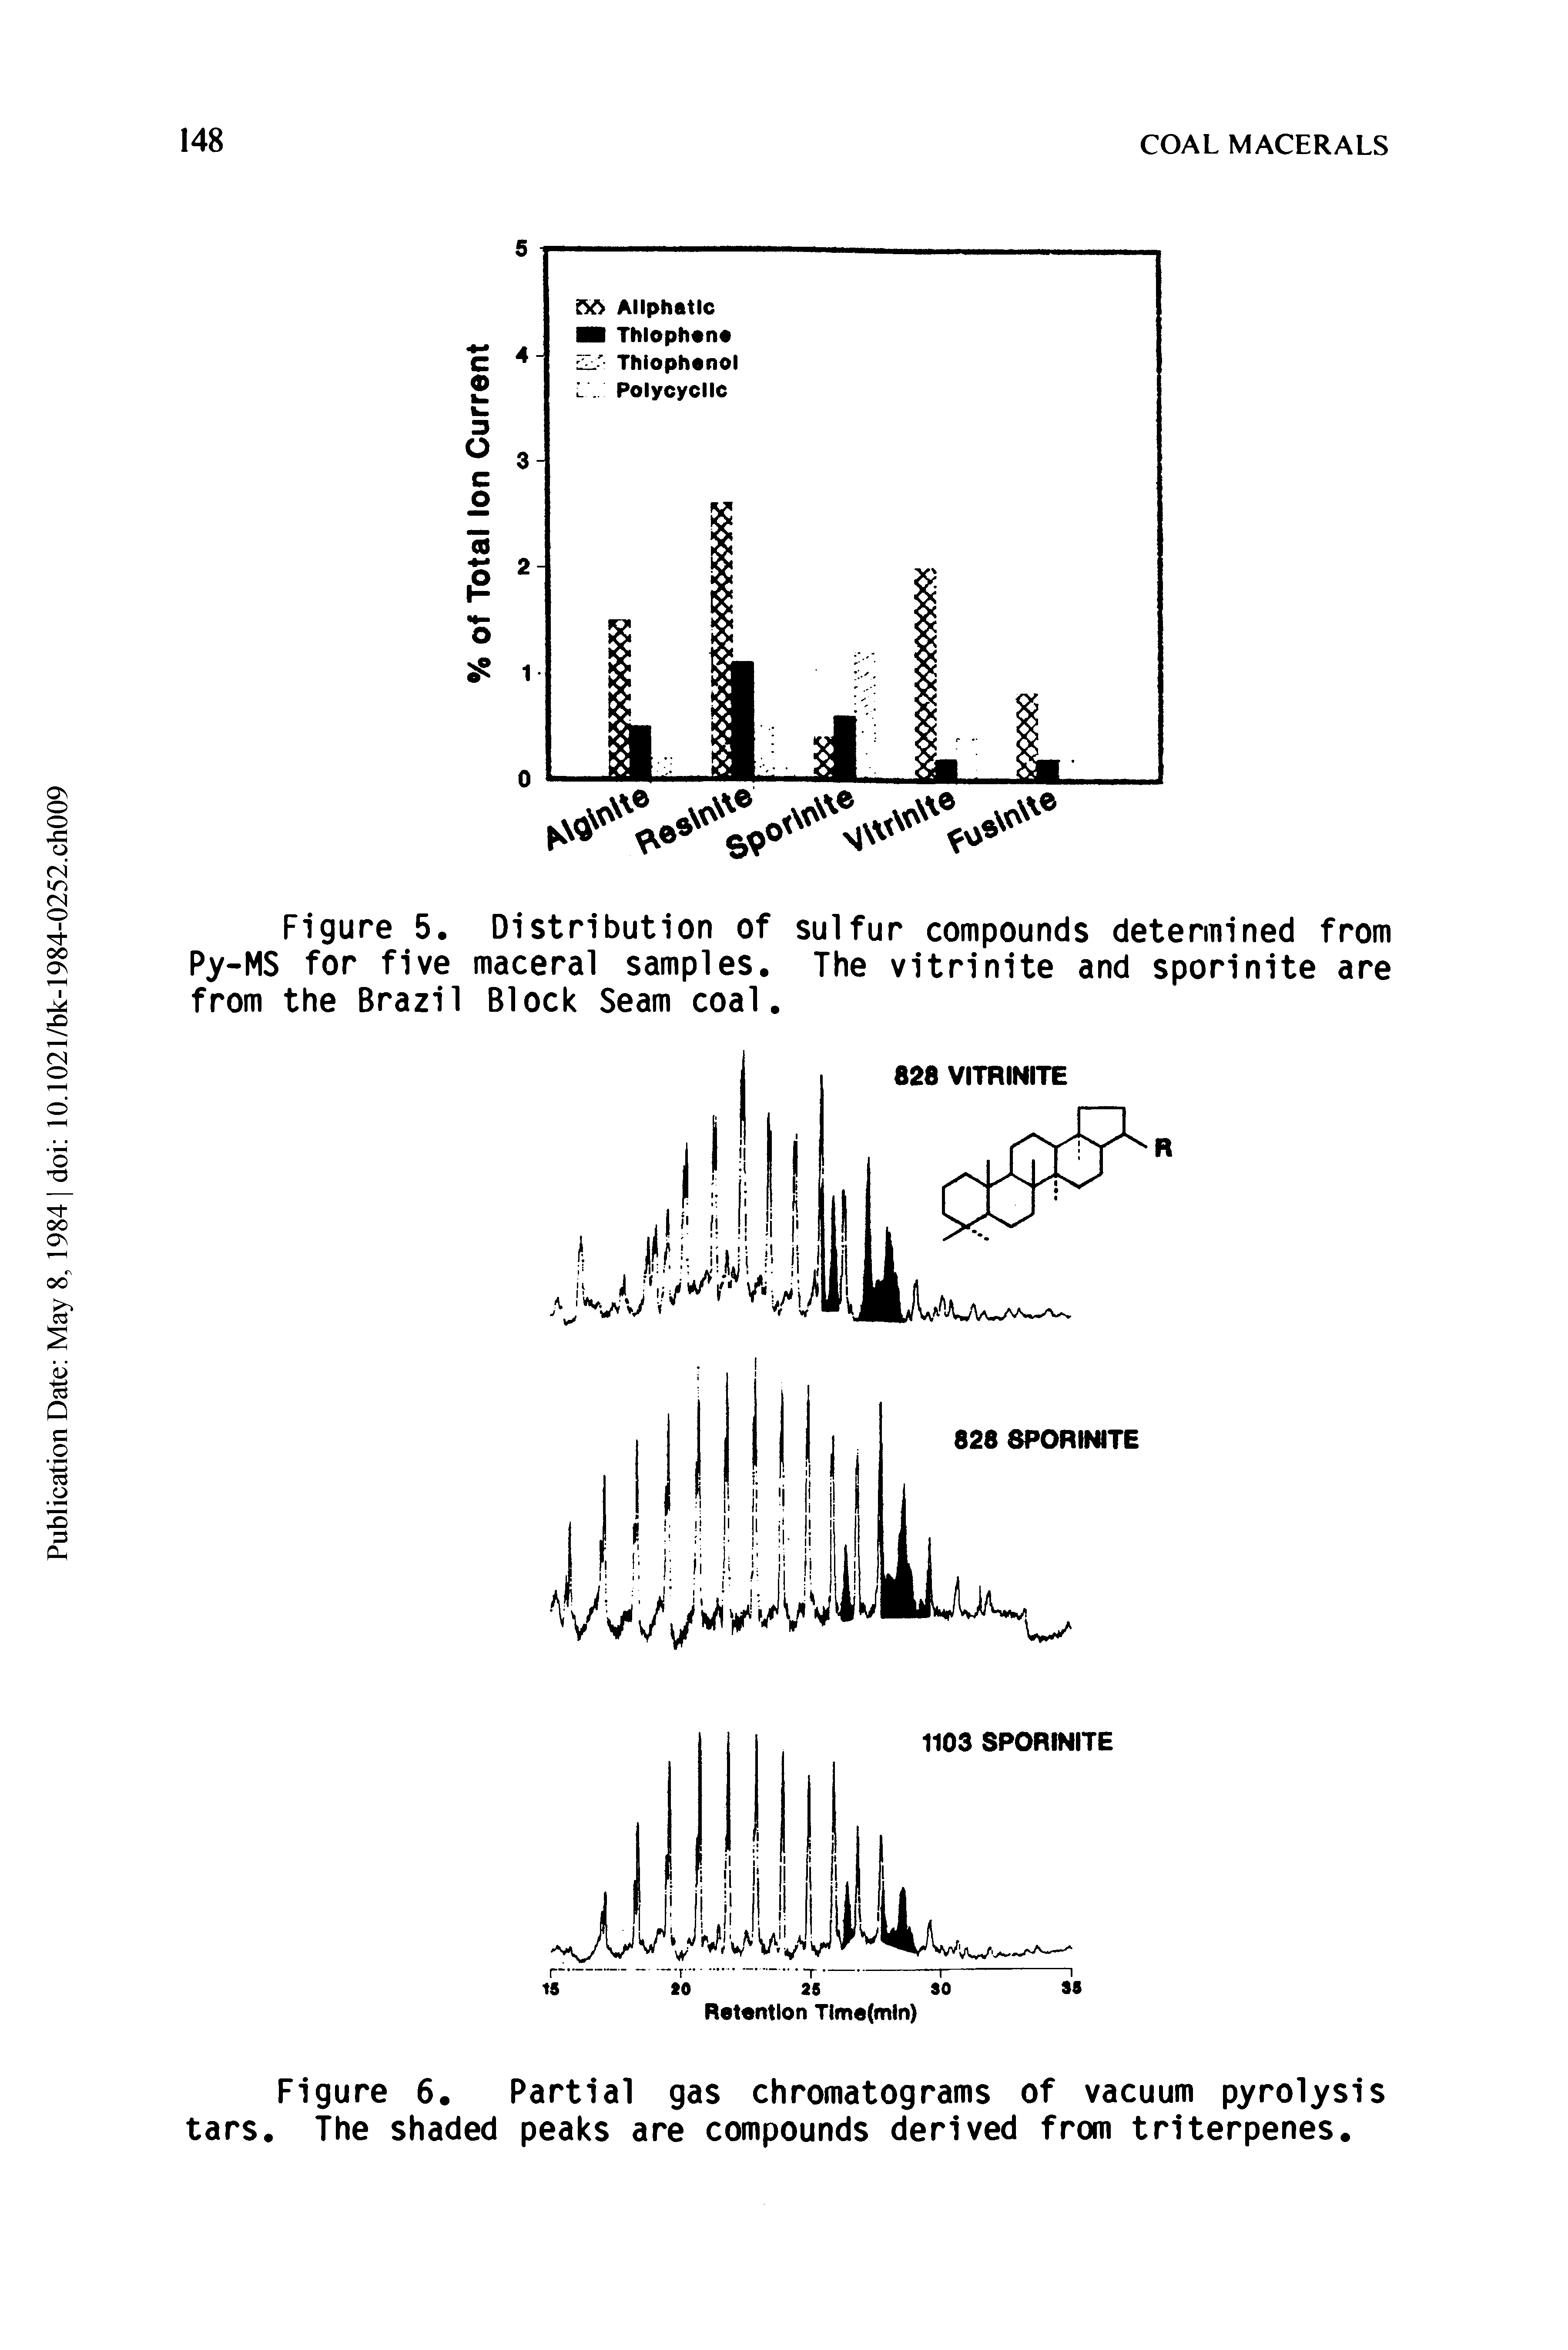 Figure 5. Distribution of sulfur compounds determined from Py-MS for five maceral samples. The vitrinite and sporinite are from the Brazil Block Seam coal.